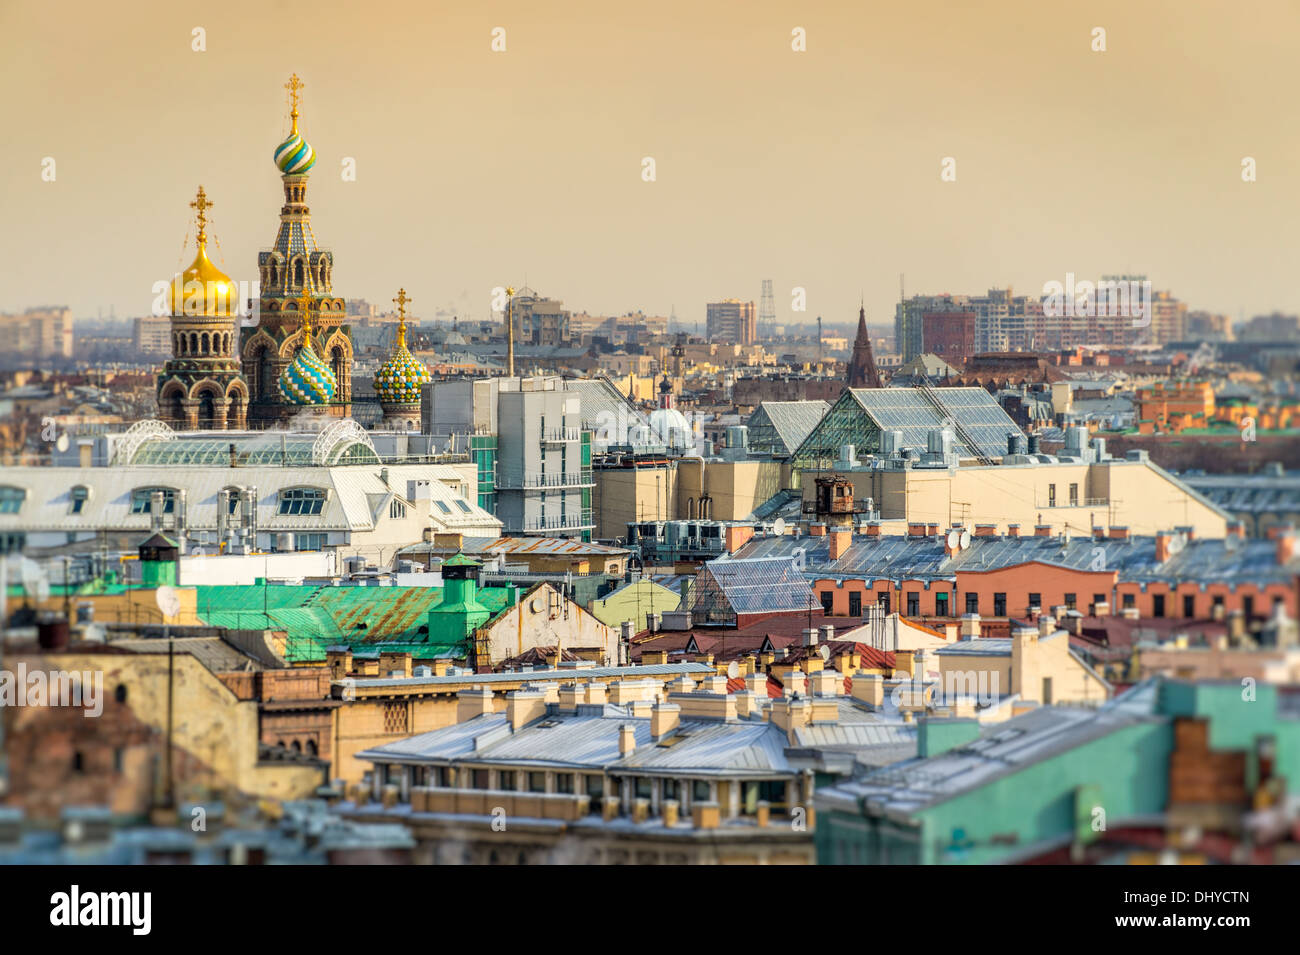 View of Saint Petersburg skyline and Church of the Savior on Blood domes from from Saint Isaac's Cathedral Stock Photo